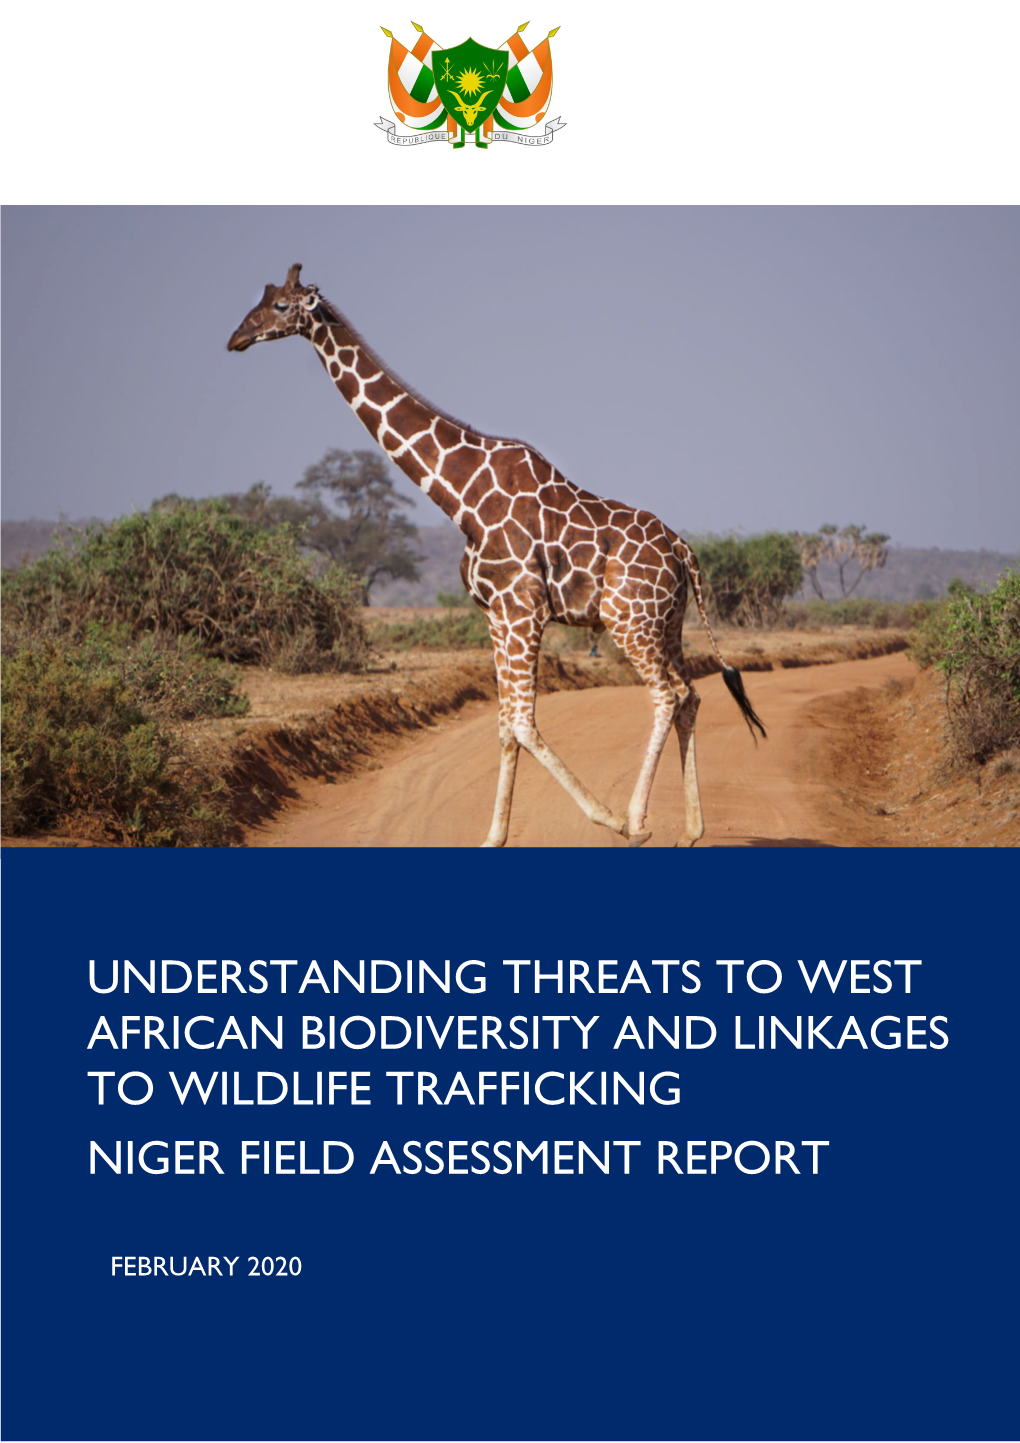 Niger Field Assessment Report. Edited by Balinga M